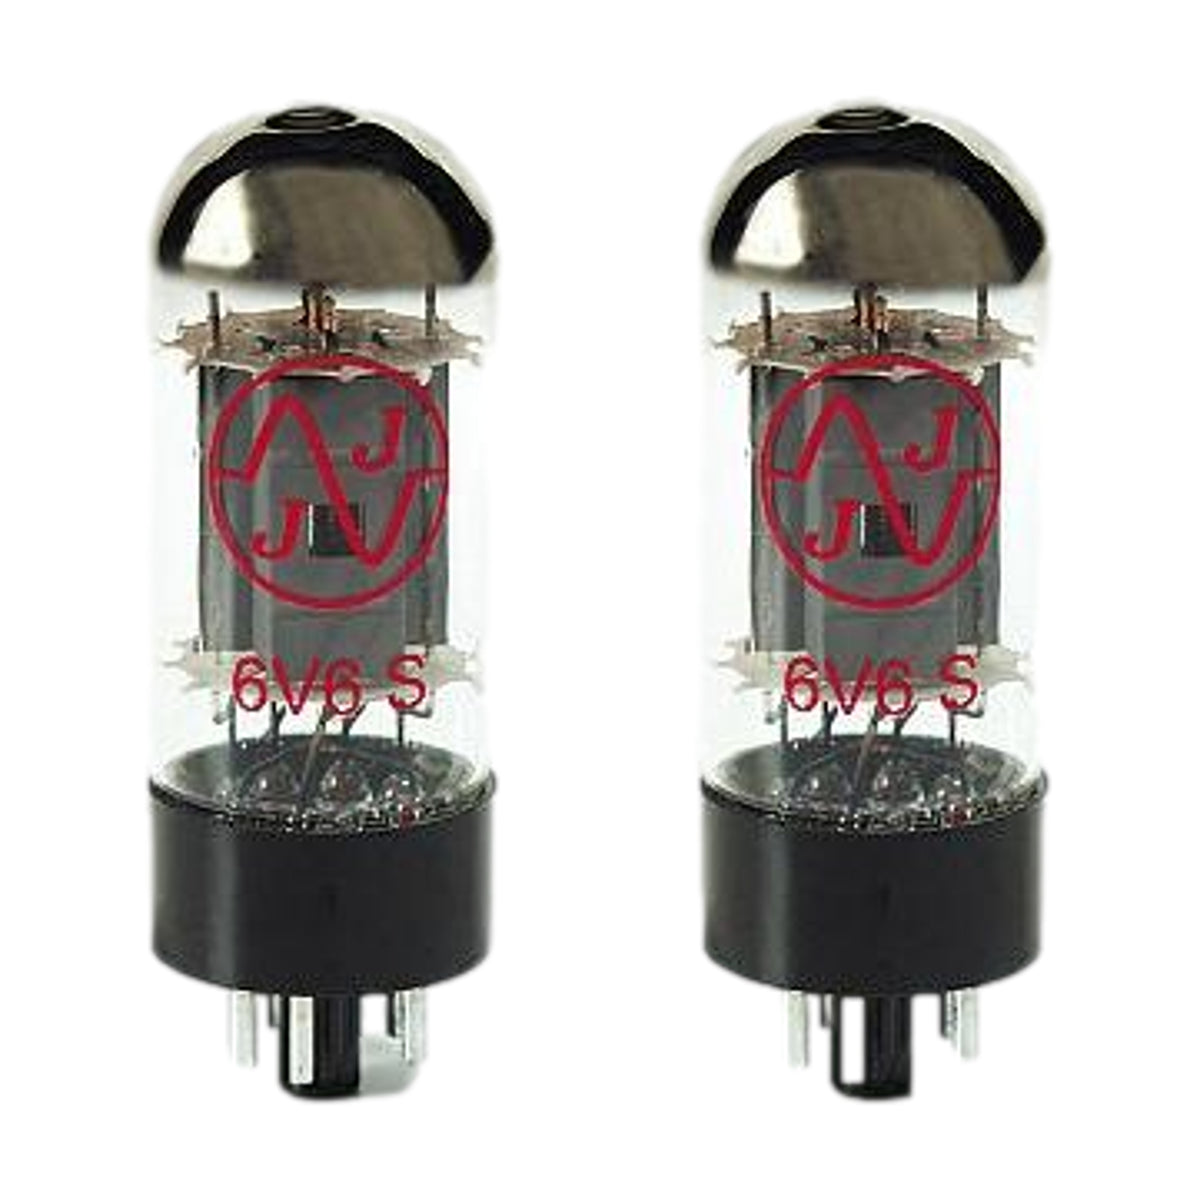 JJ Electronic 6V6S Power Tubes Matched Pair